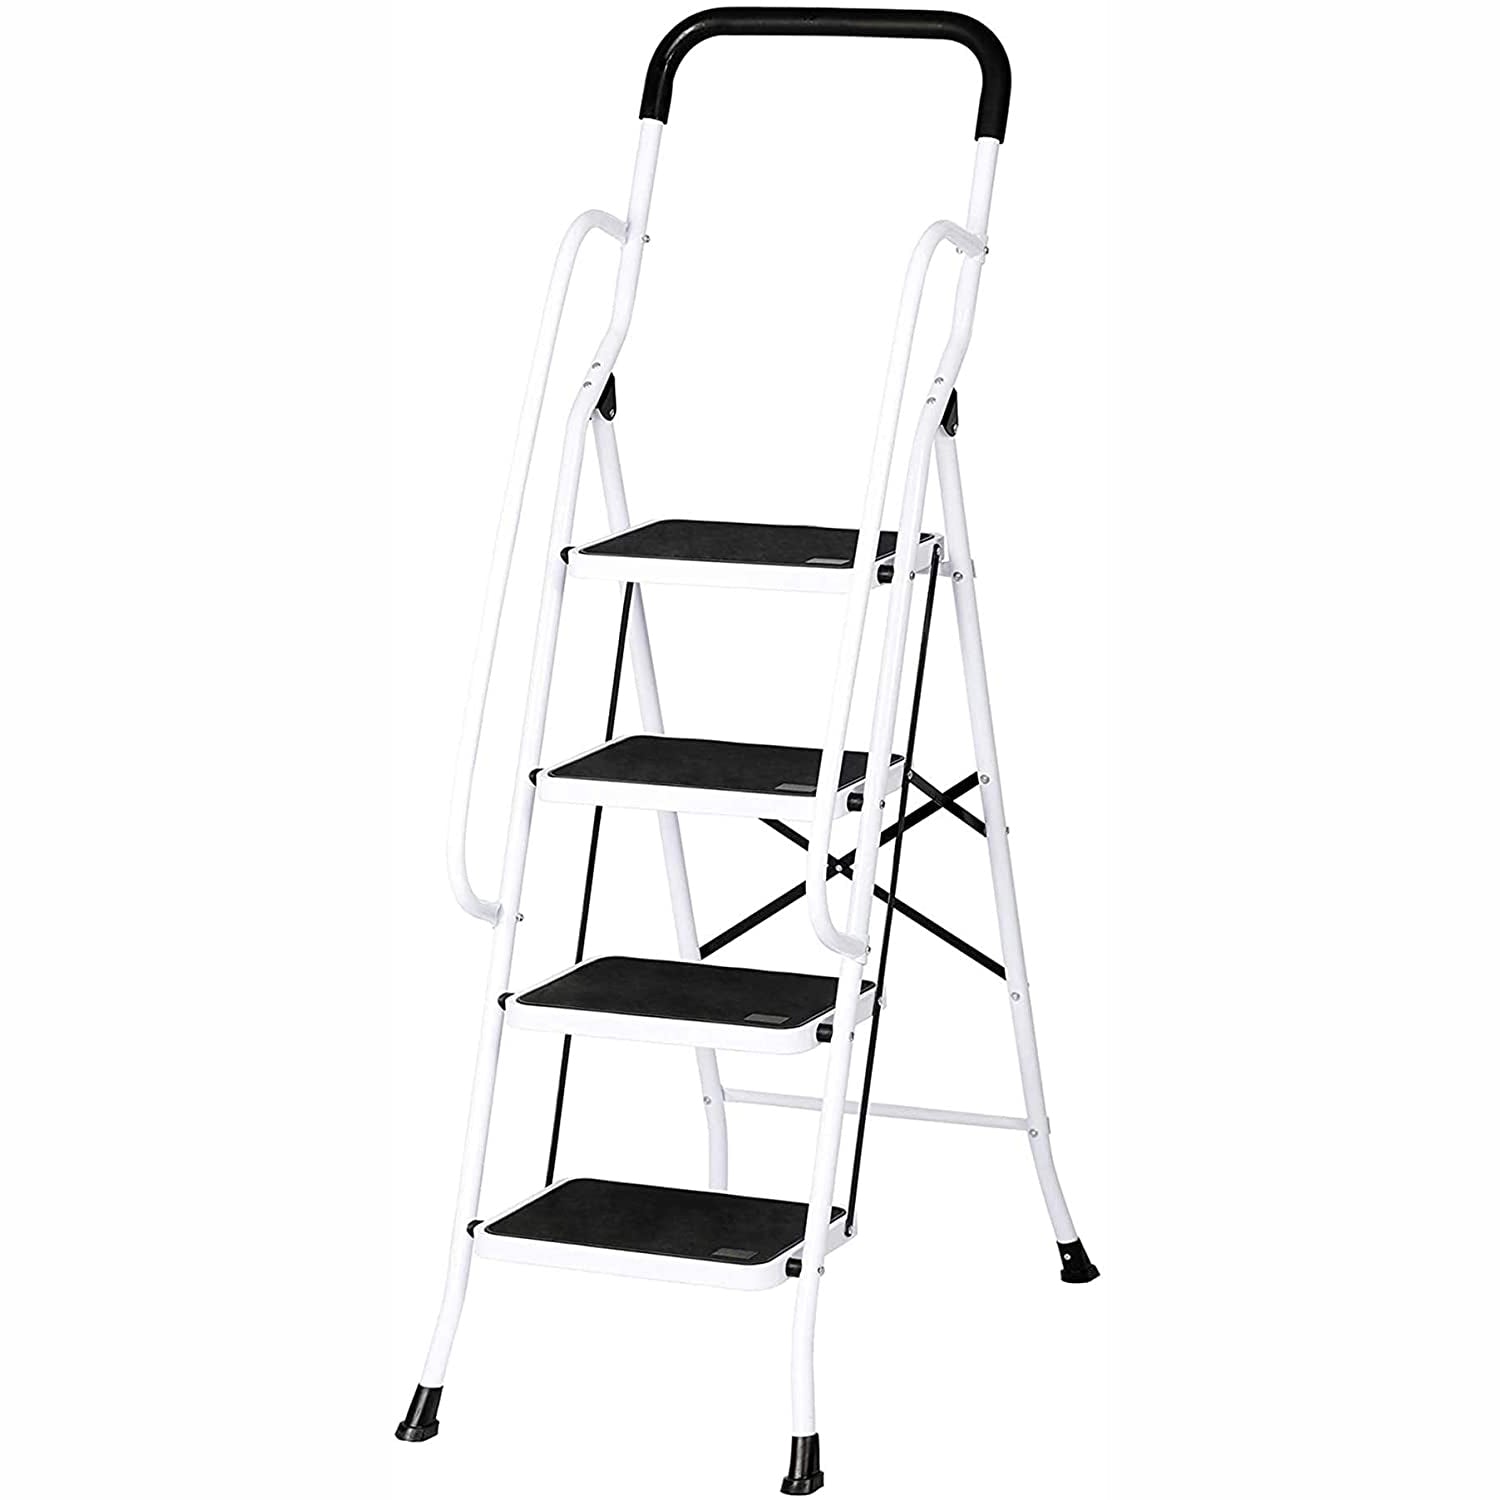 4 Steps Ladder Folding Step Stool With Hand Grip Non-Slip Safety Rails 330 lb Load Capacity